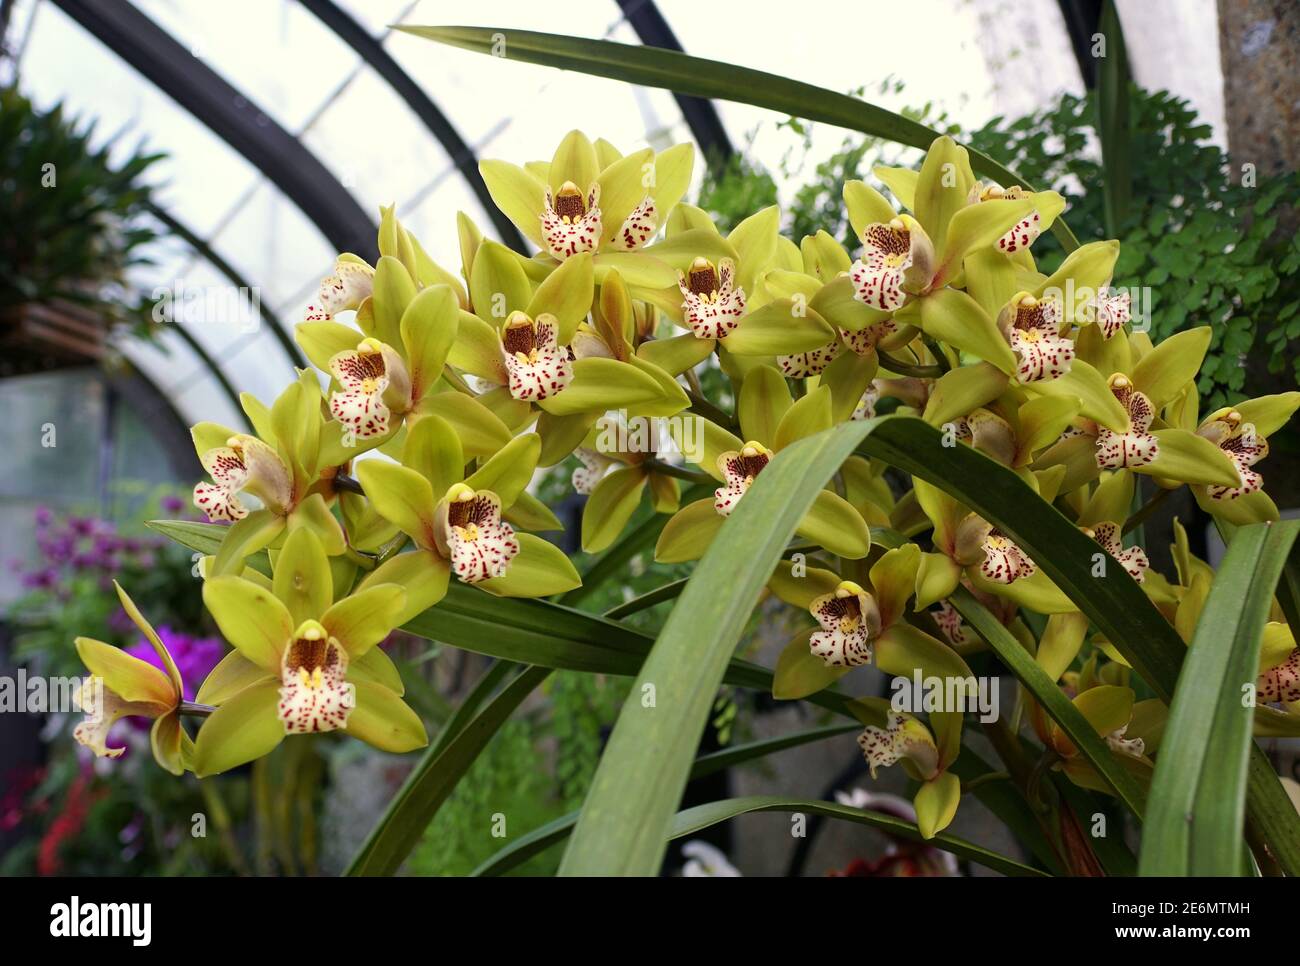 Beautiful cluster of the yellow and white epidendrum orchids Stock Photo